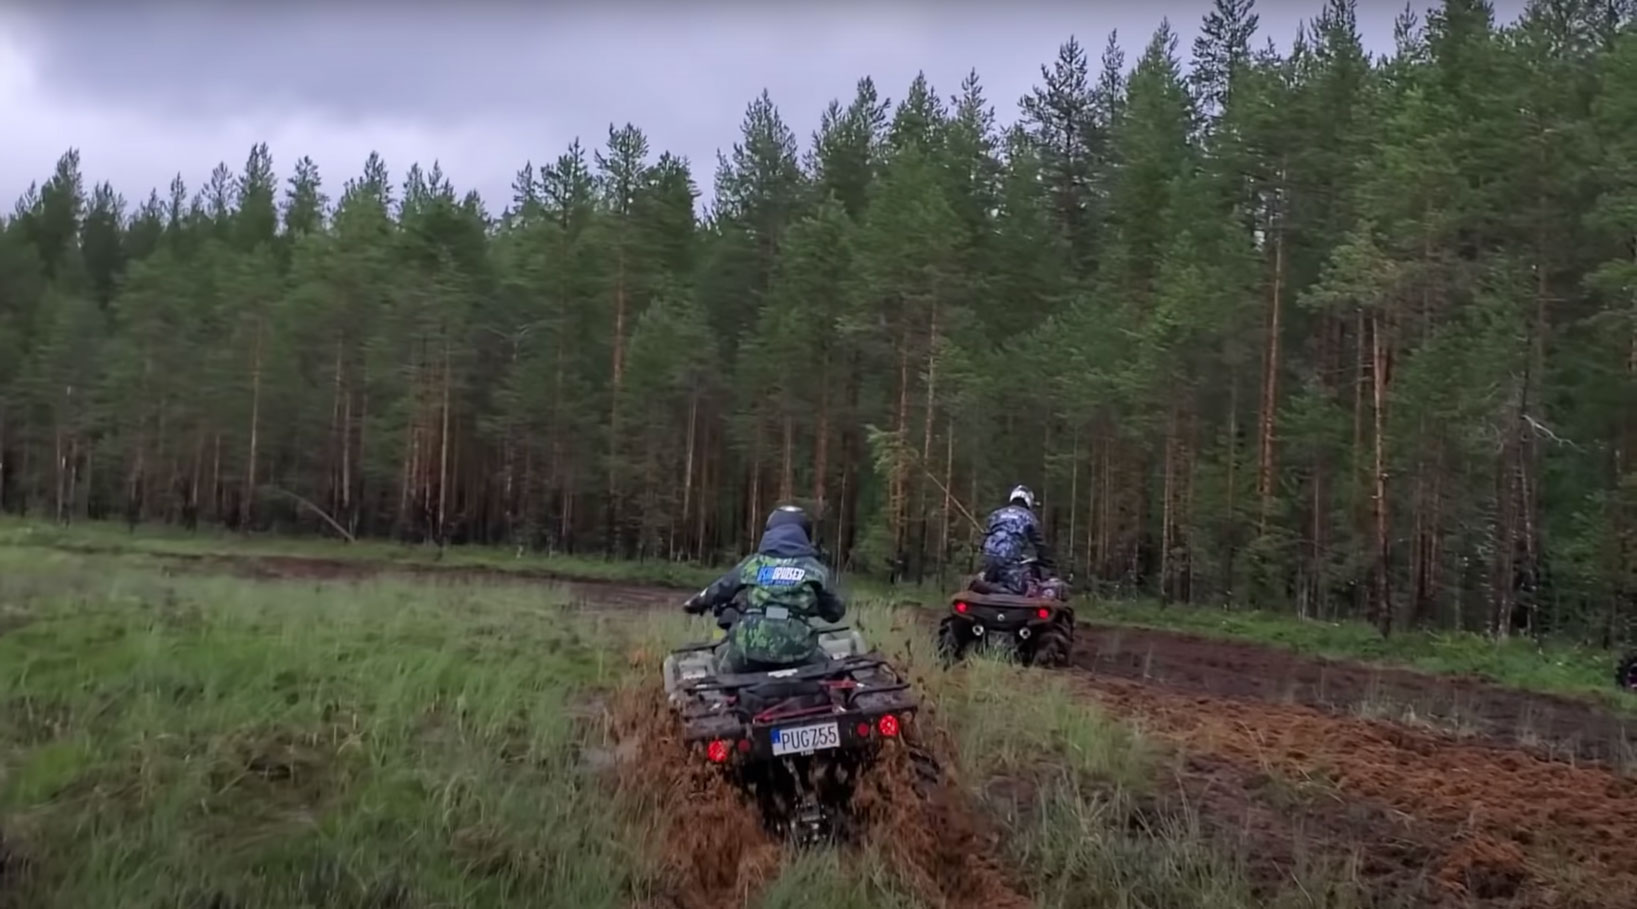 Did We Find The Most Capable ATV Ever?